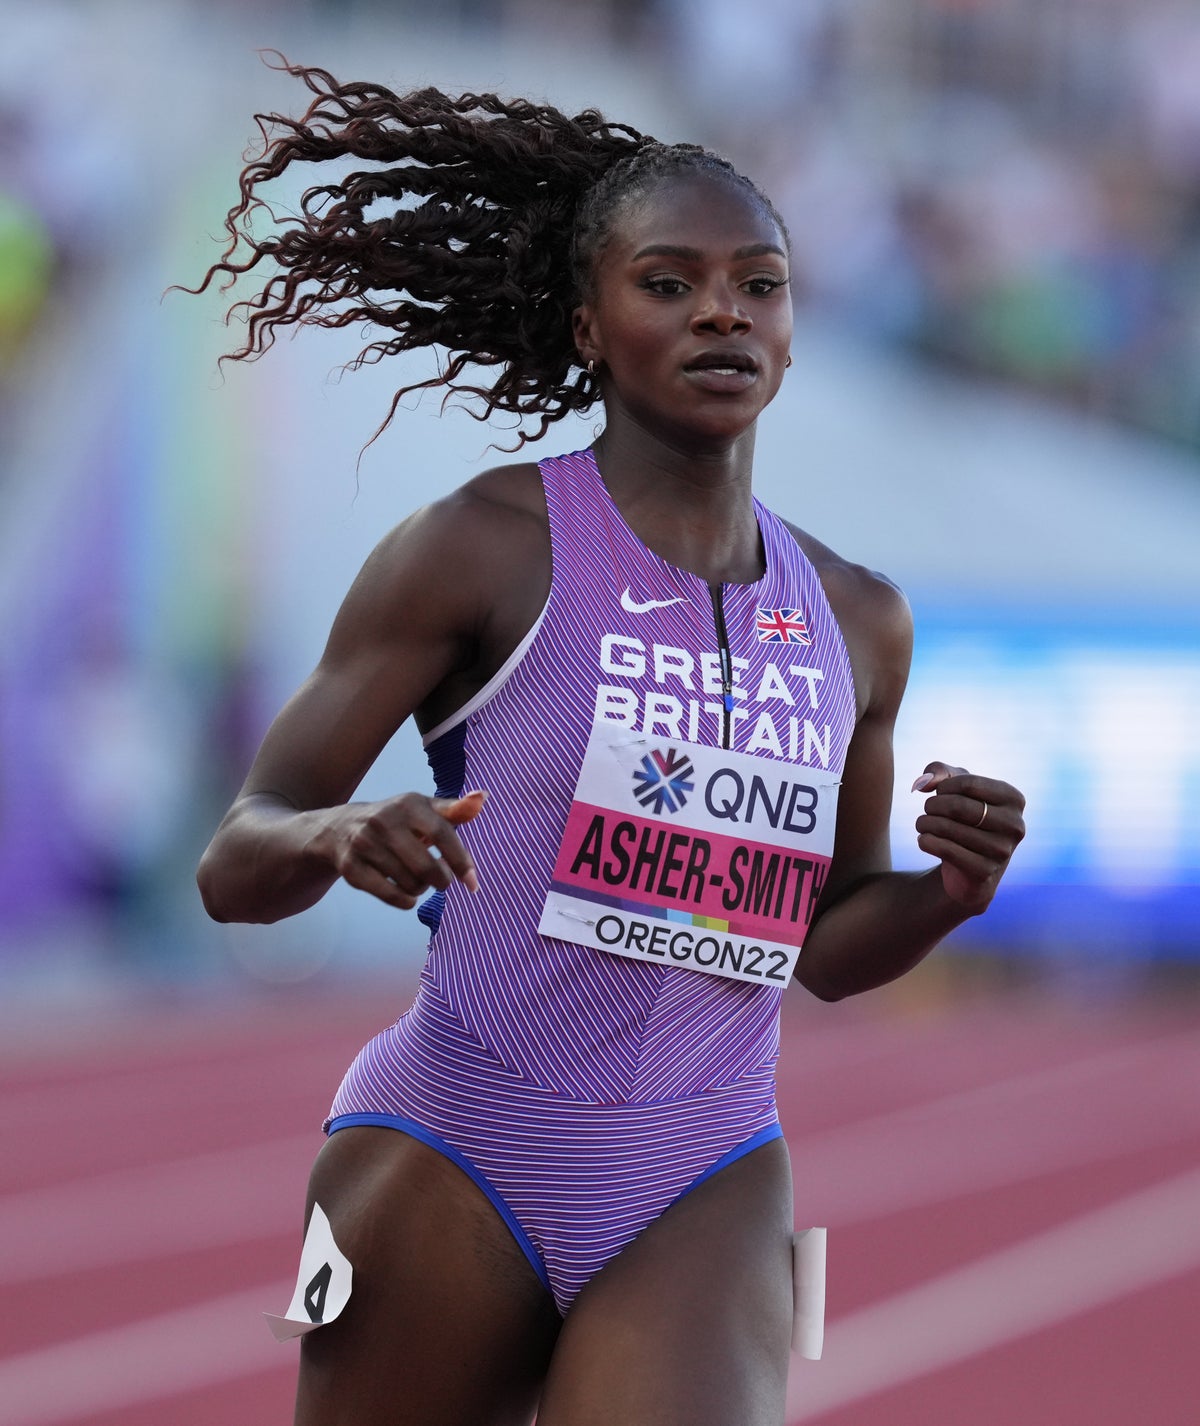 Heartbreak for Great Britain as Dina Asher-Smith injured in relay final